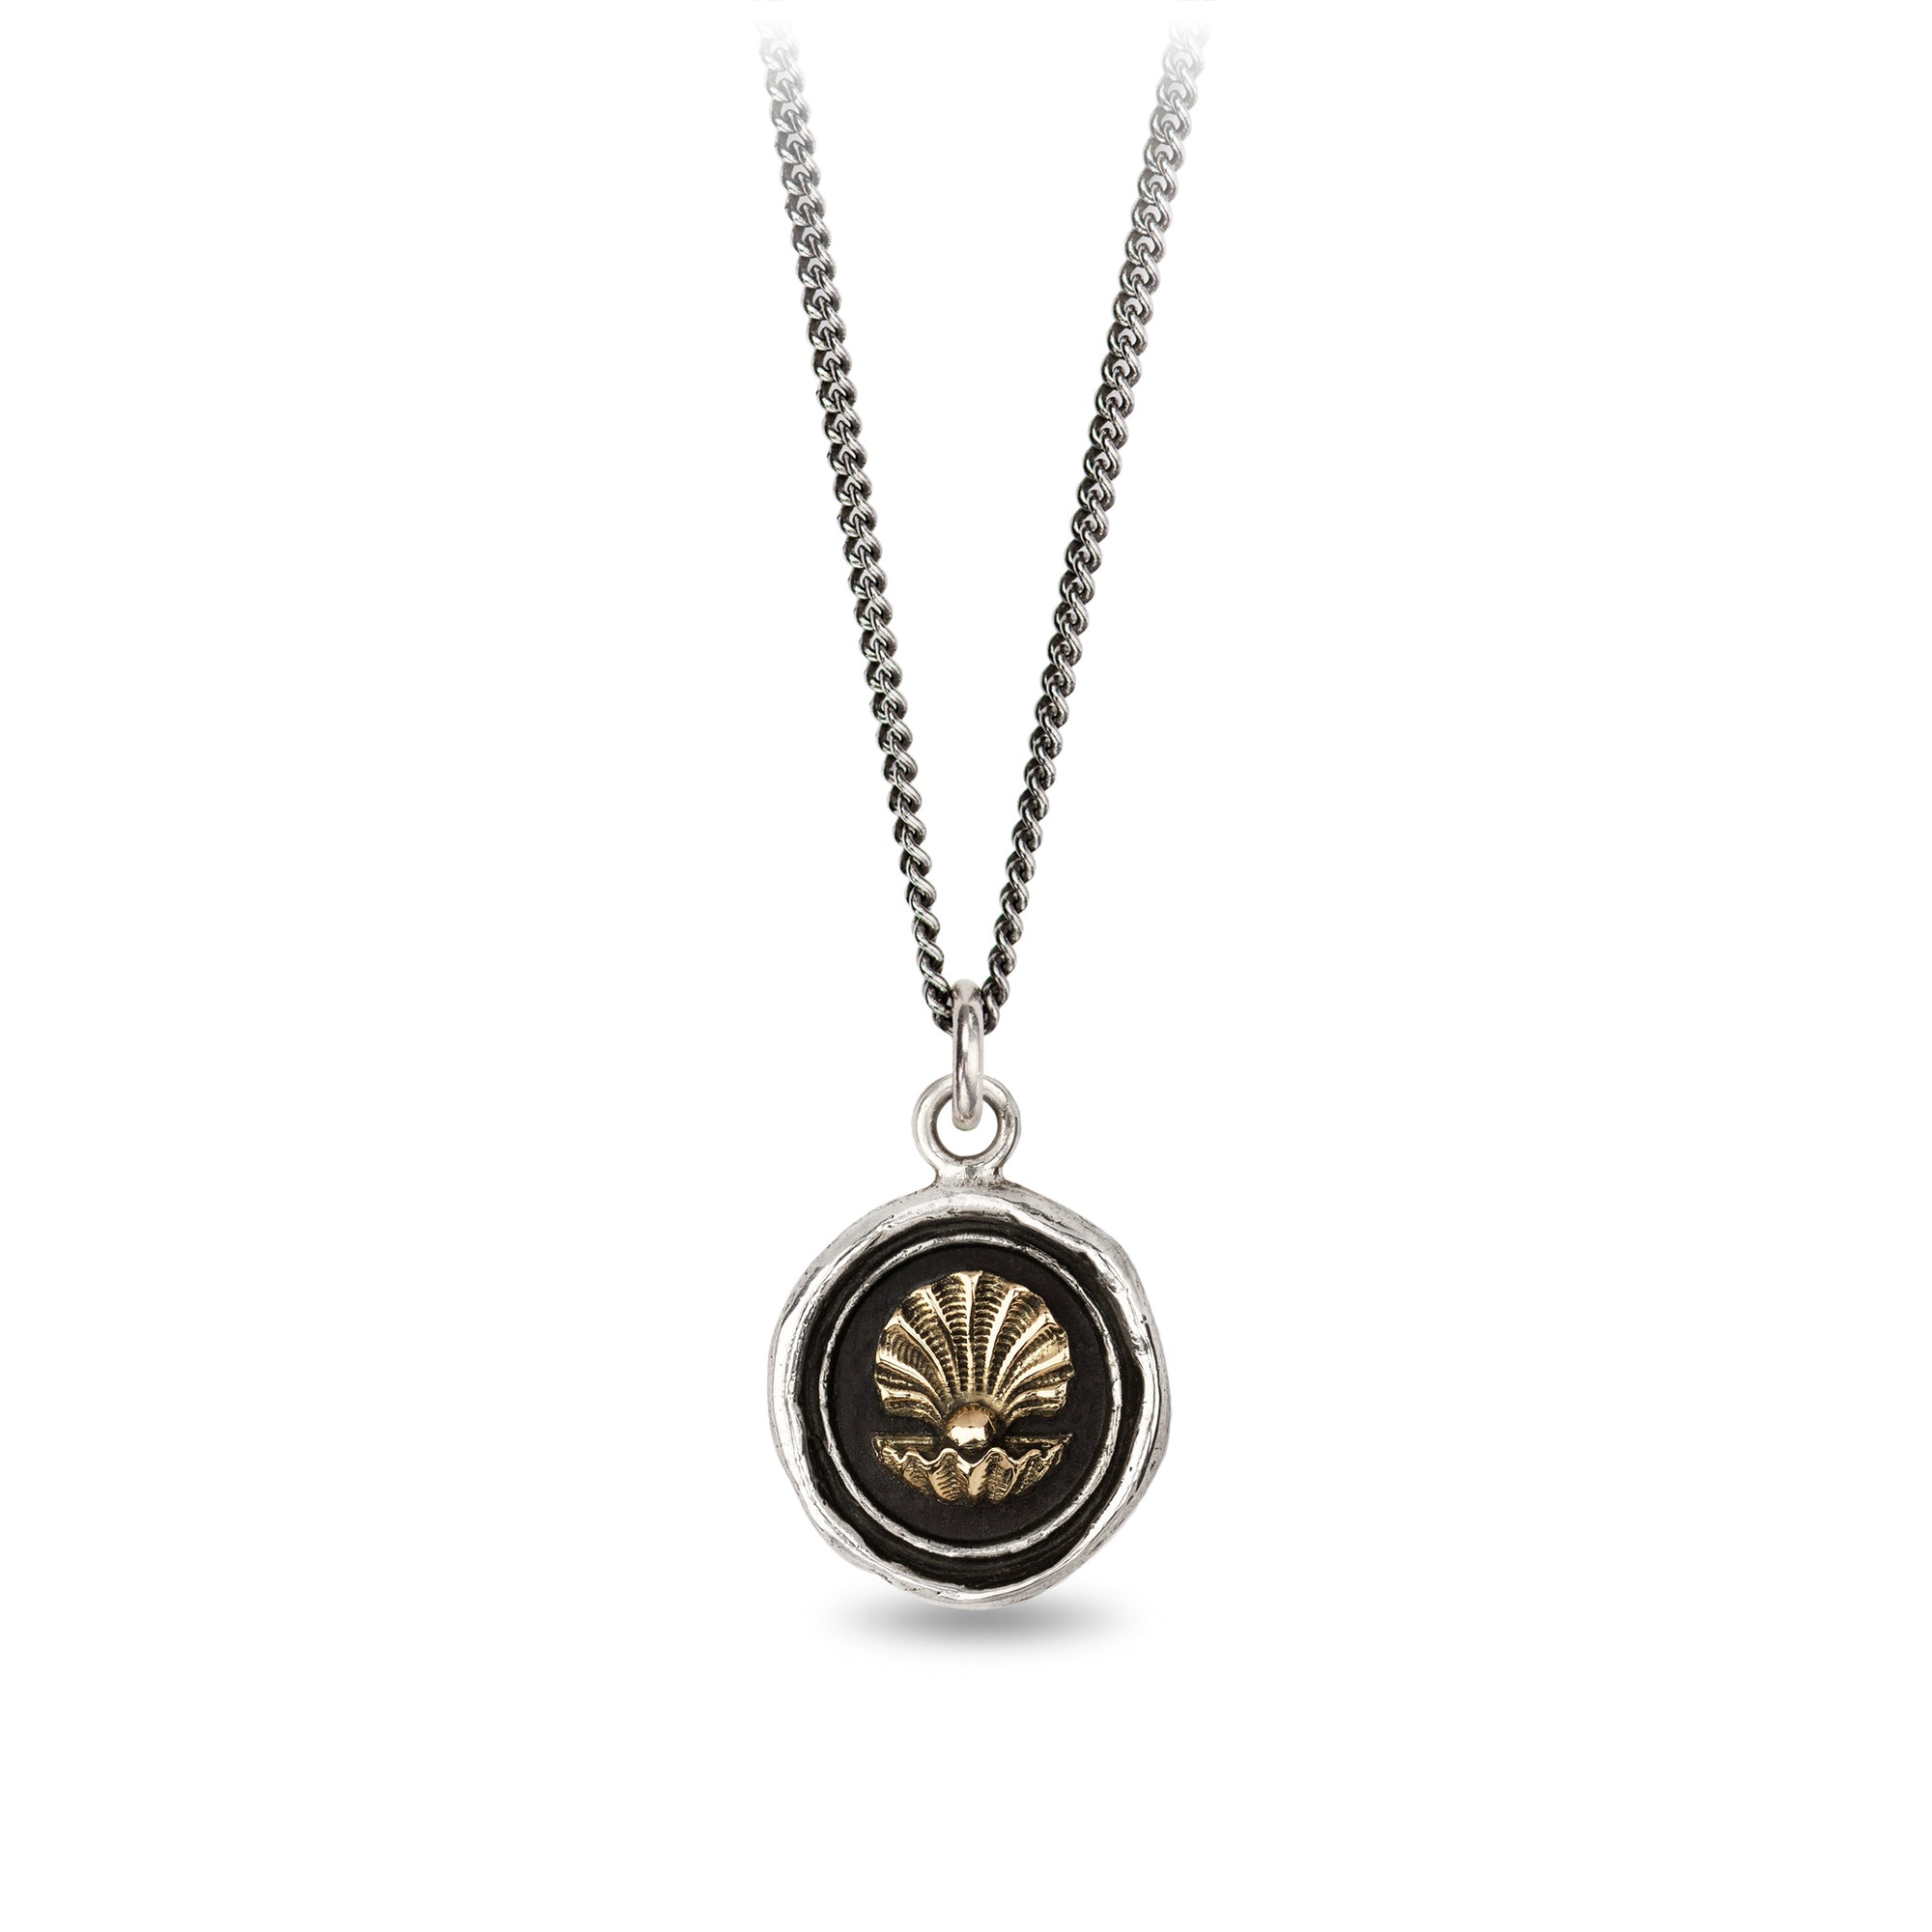 The World is Your Oyster 14K Gold On Silver Talisman